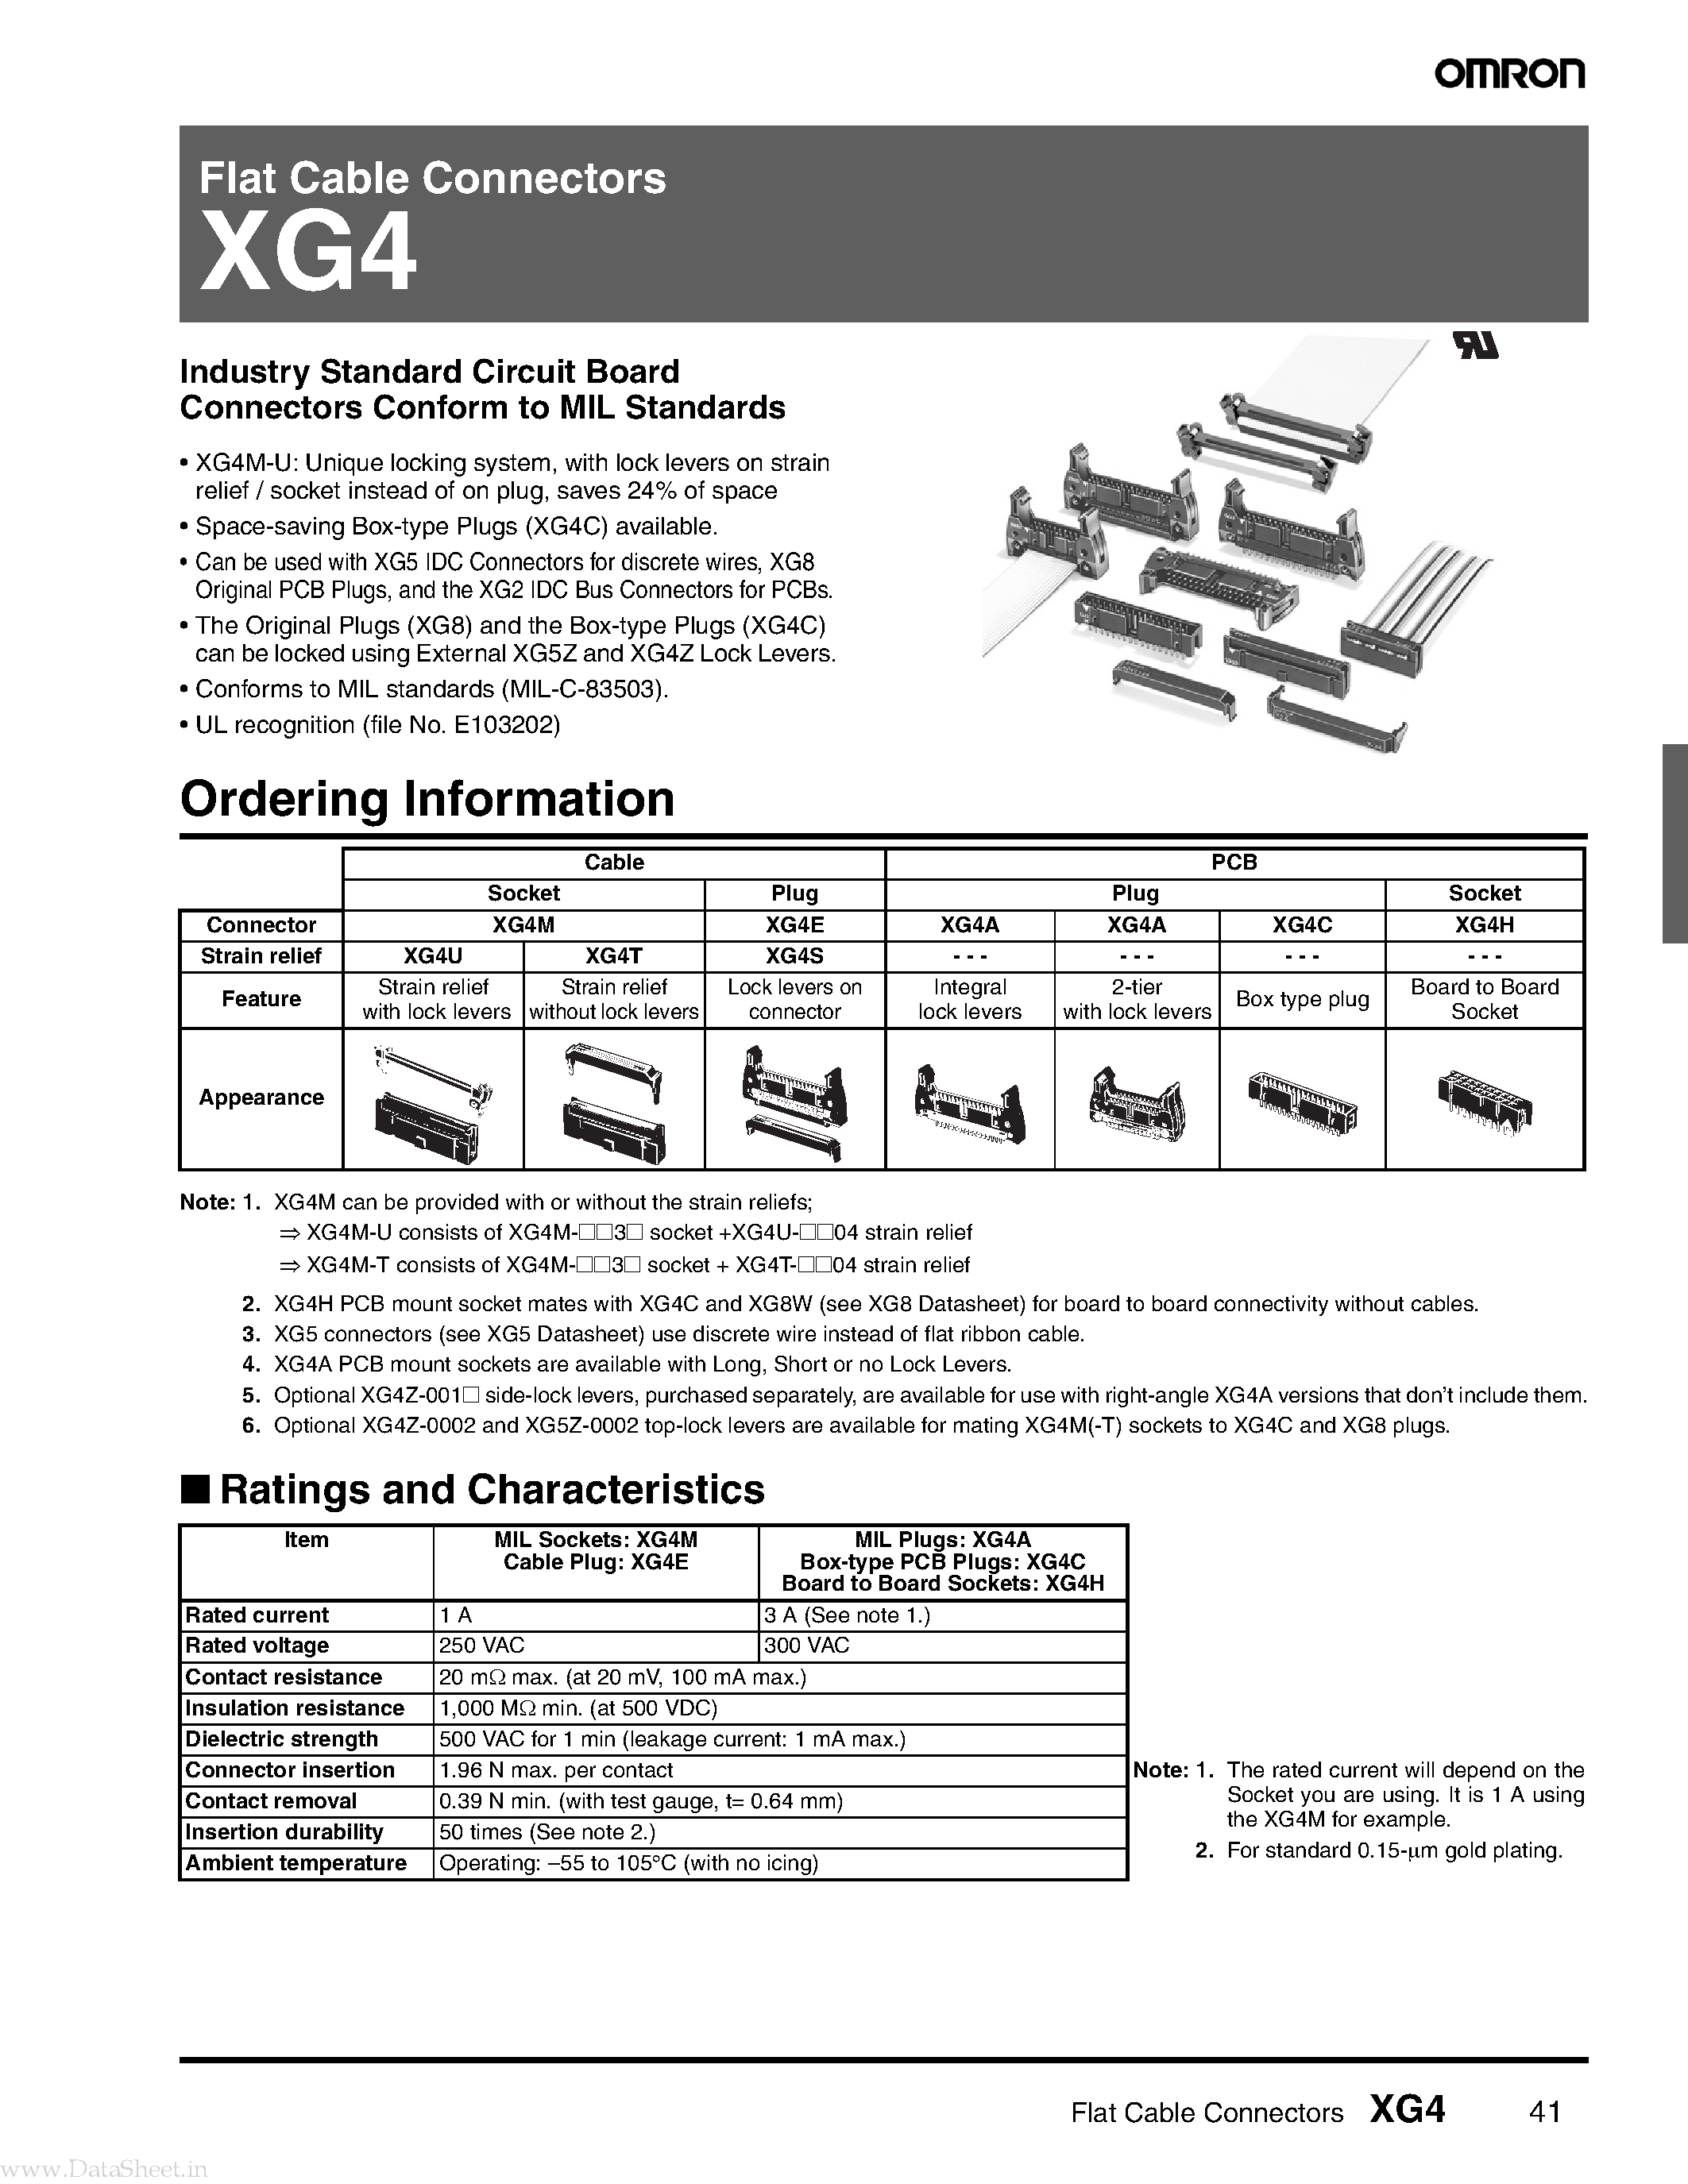 Datasheet XG4 - Flat Cable Connectors page 1